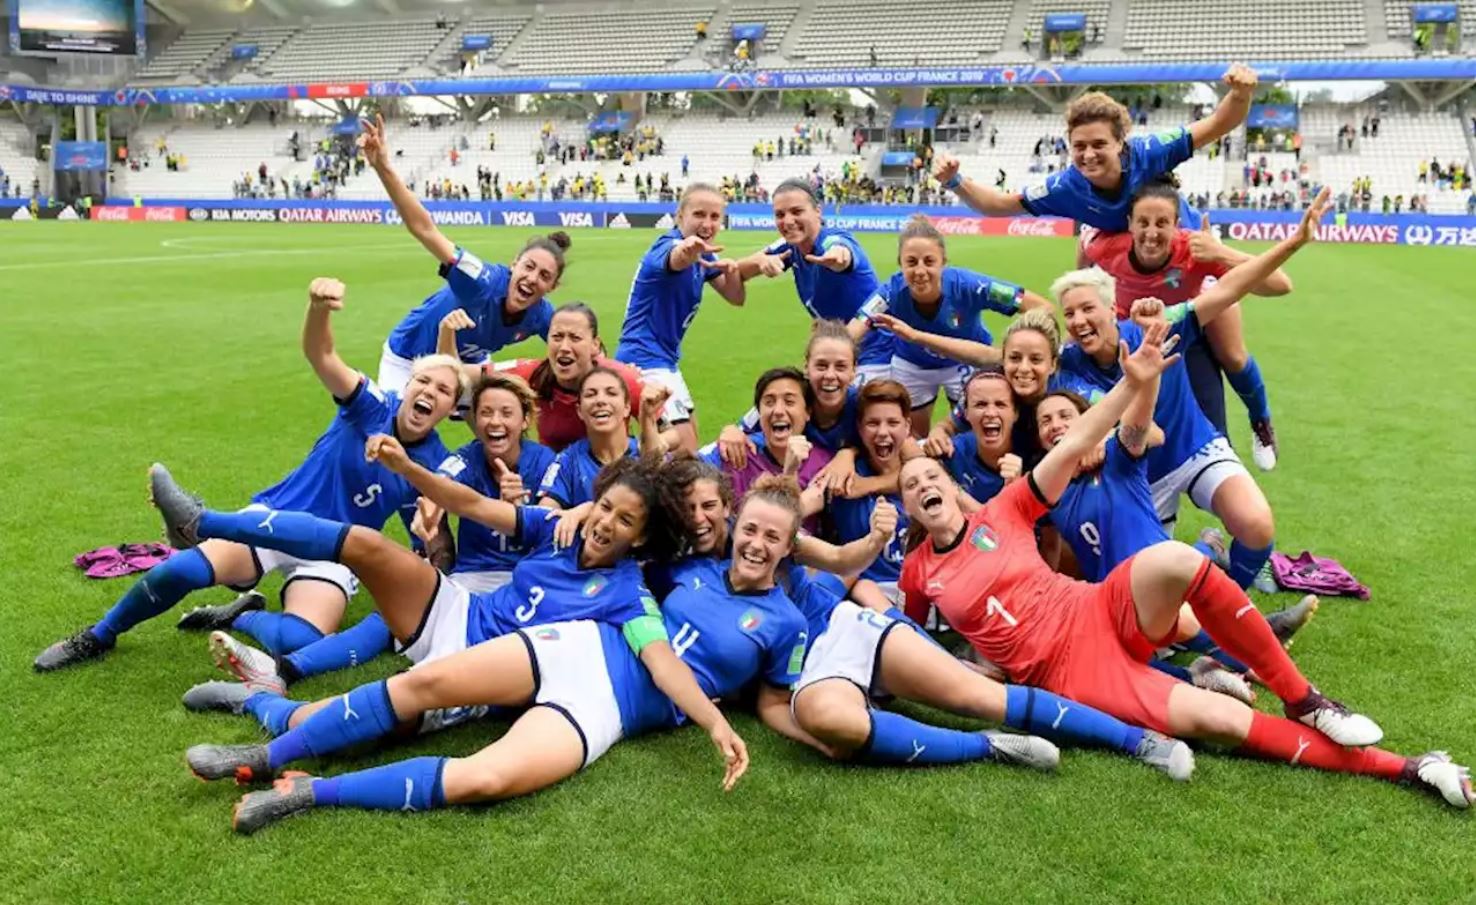 Despite the financial struggles and legislative limitations, there are good foundations to make the Serie A Femminile and women's football grow in Italy